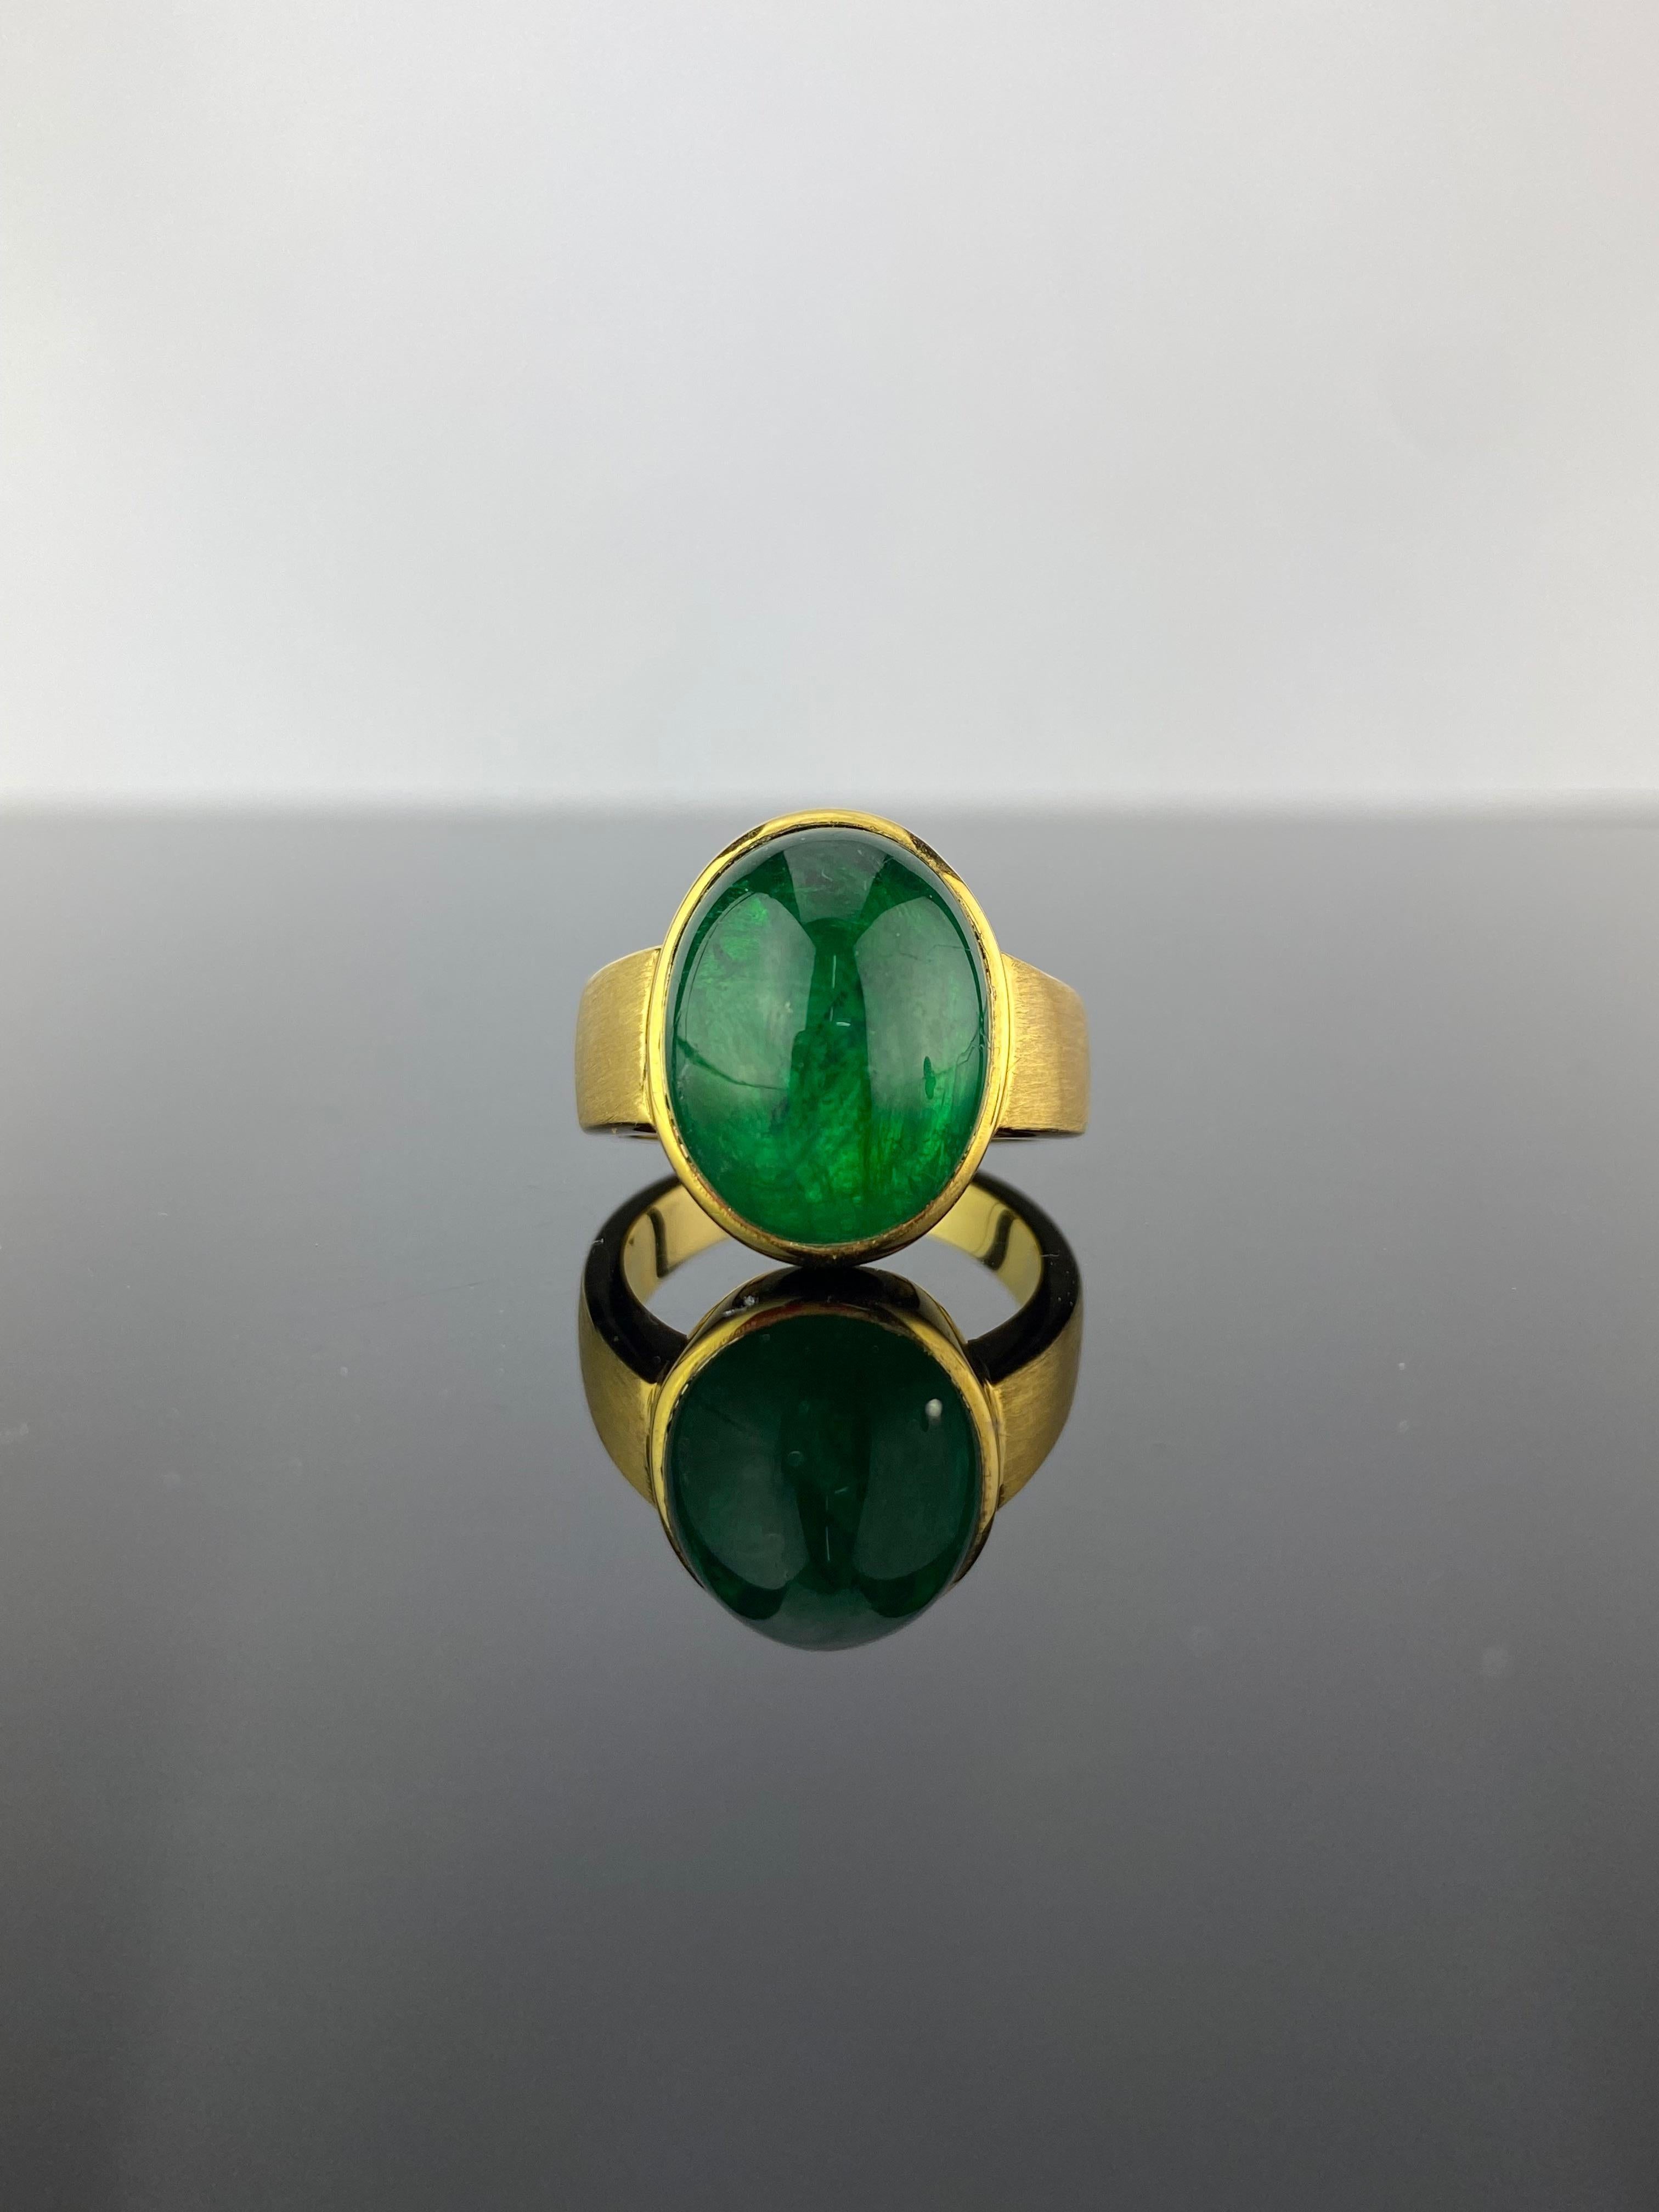 A stunning 12.05 carat Zambian Emerald cabochon and matte finish 18K Yellow Gold ring. The natural Emerald centre stone is transparent with an ideal vivid green color, and the matte finish gold gives the ring an antique look. The ring is currently